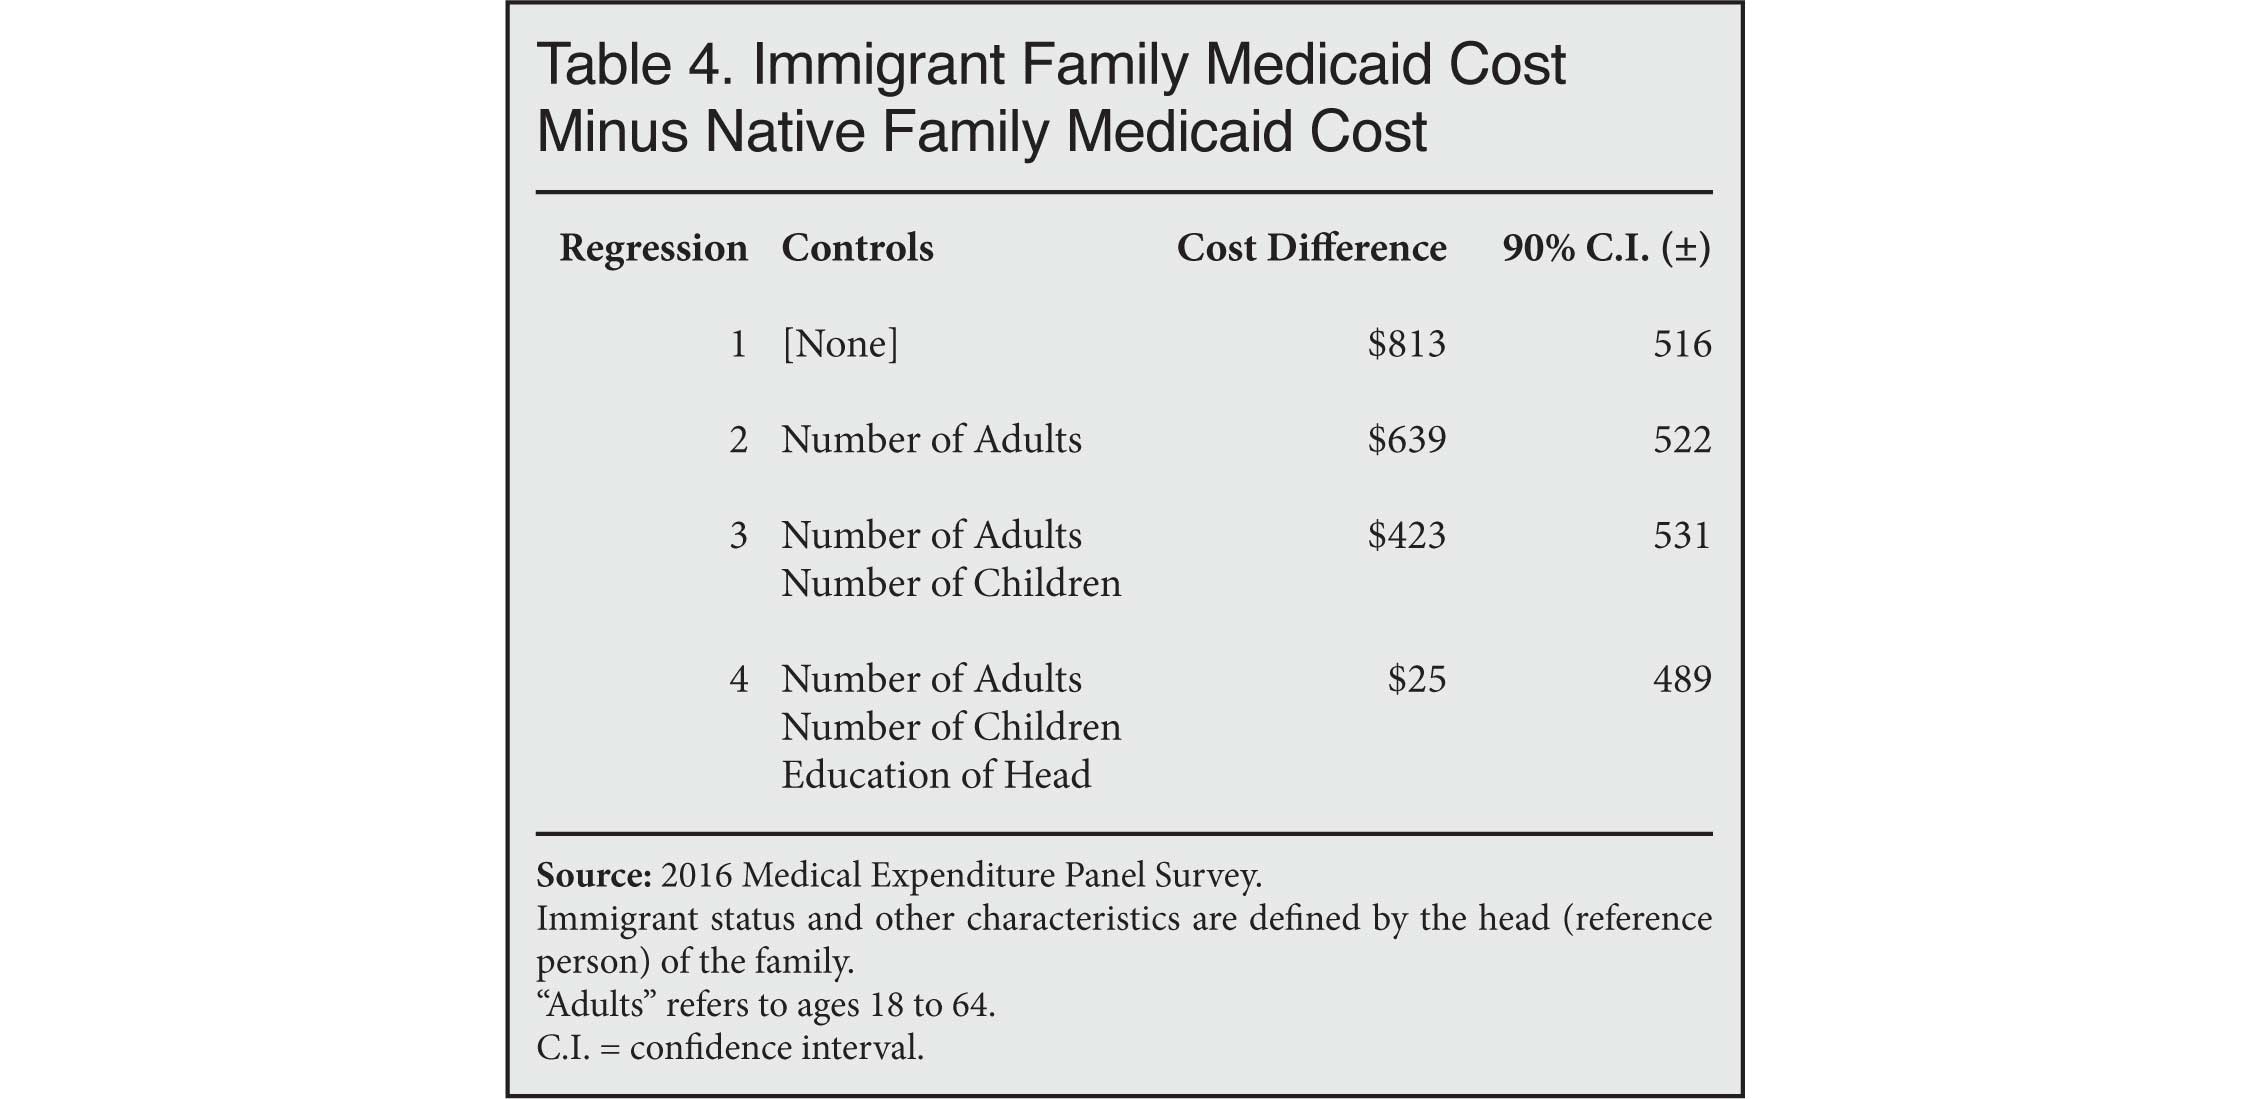 Table: Immigrant Family Medicaid Costs